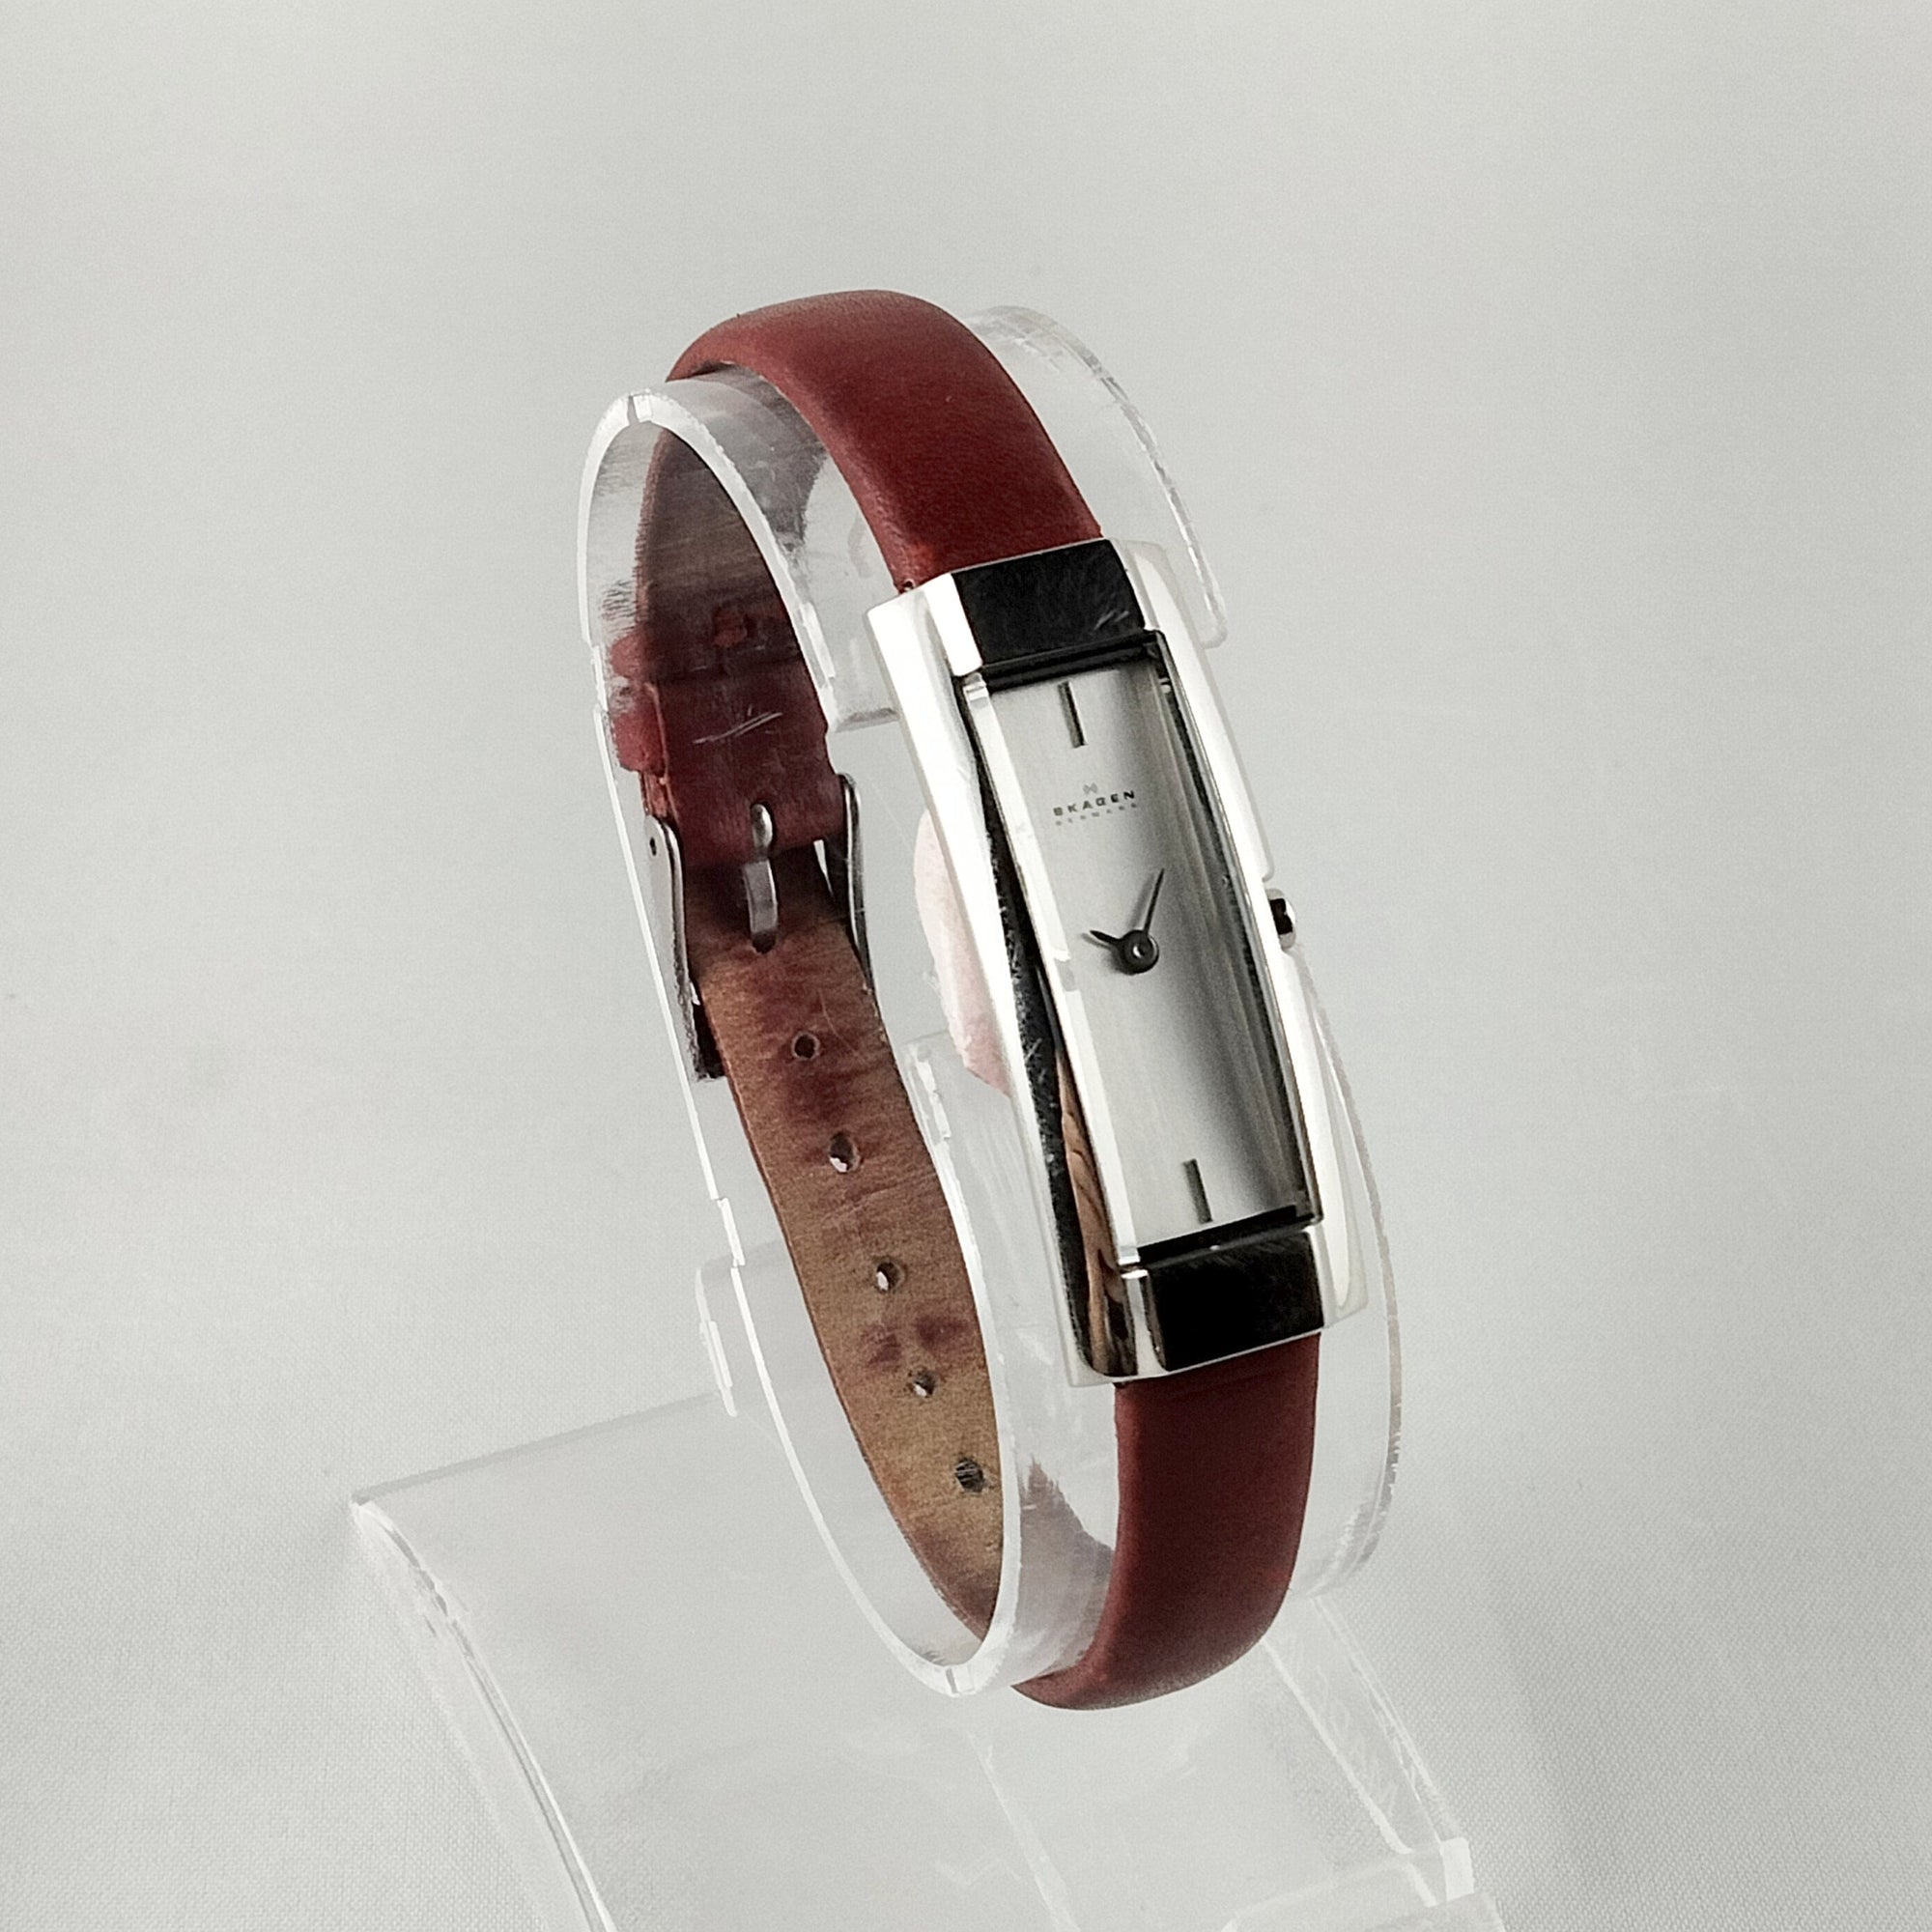 I Like Mikes Mid Century Modern Watches Skagen Women's Stainless Steel Watch, Rectangular Dial, Thin Red Genuine Leather Strap